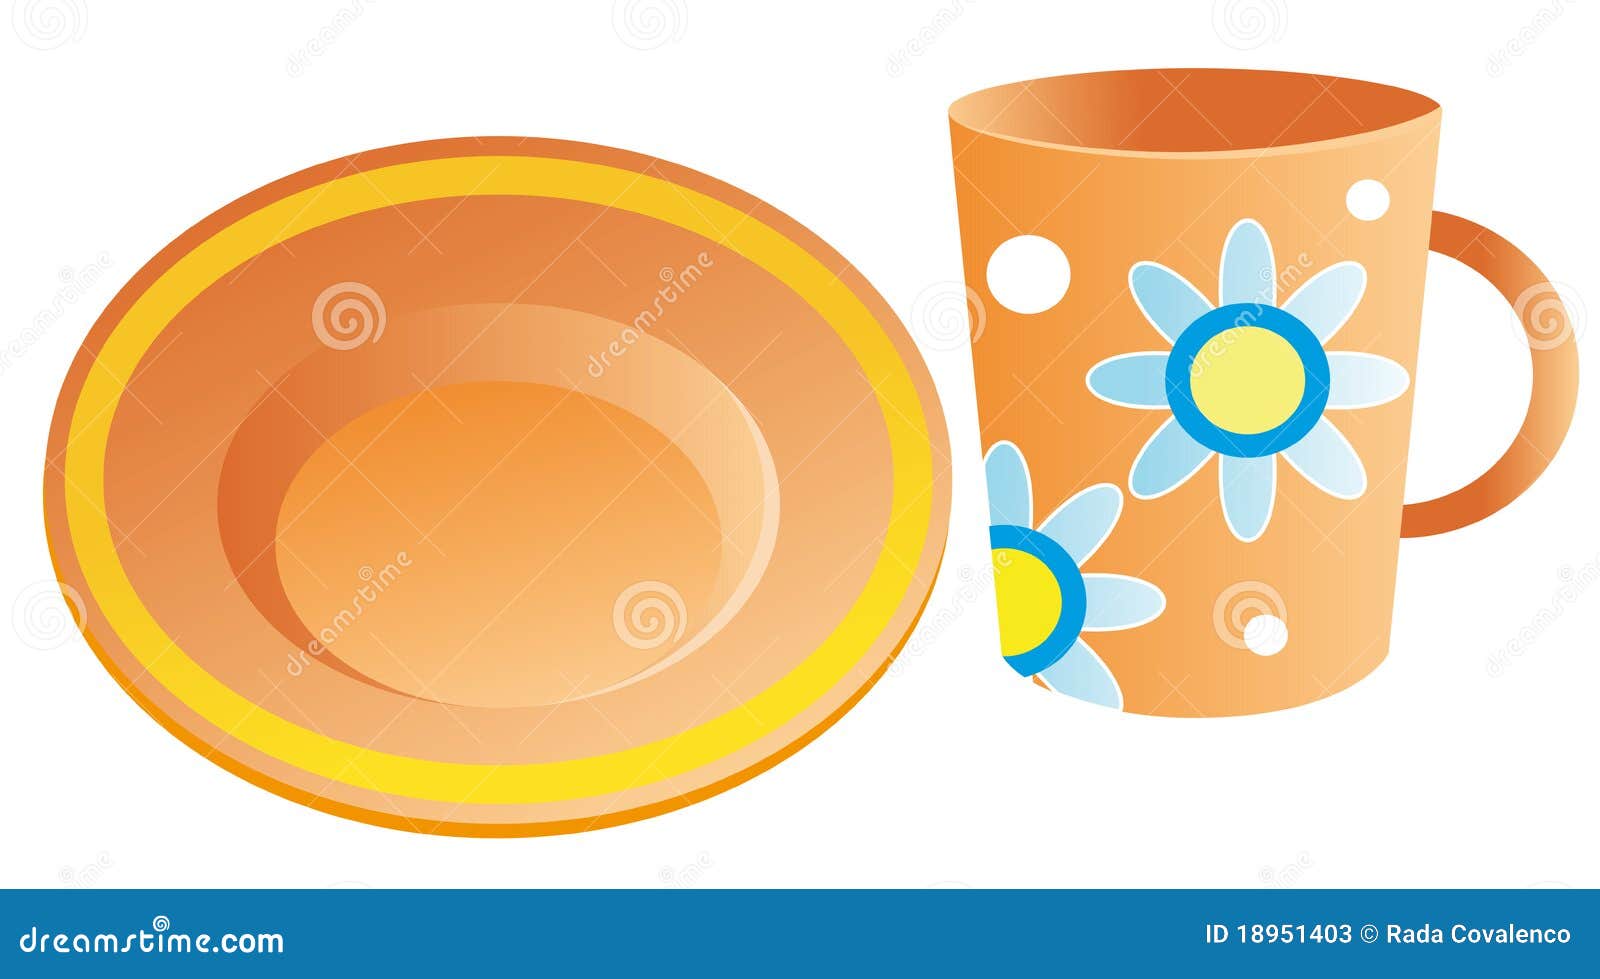 cup plate clipart - photo #3